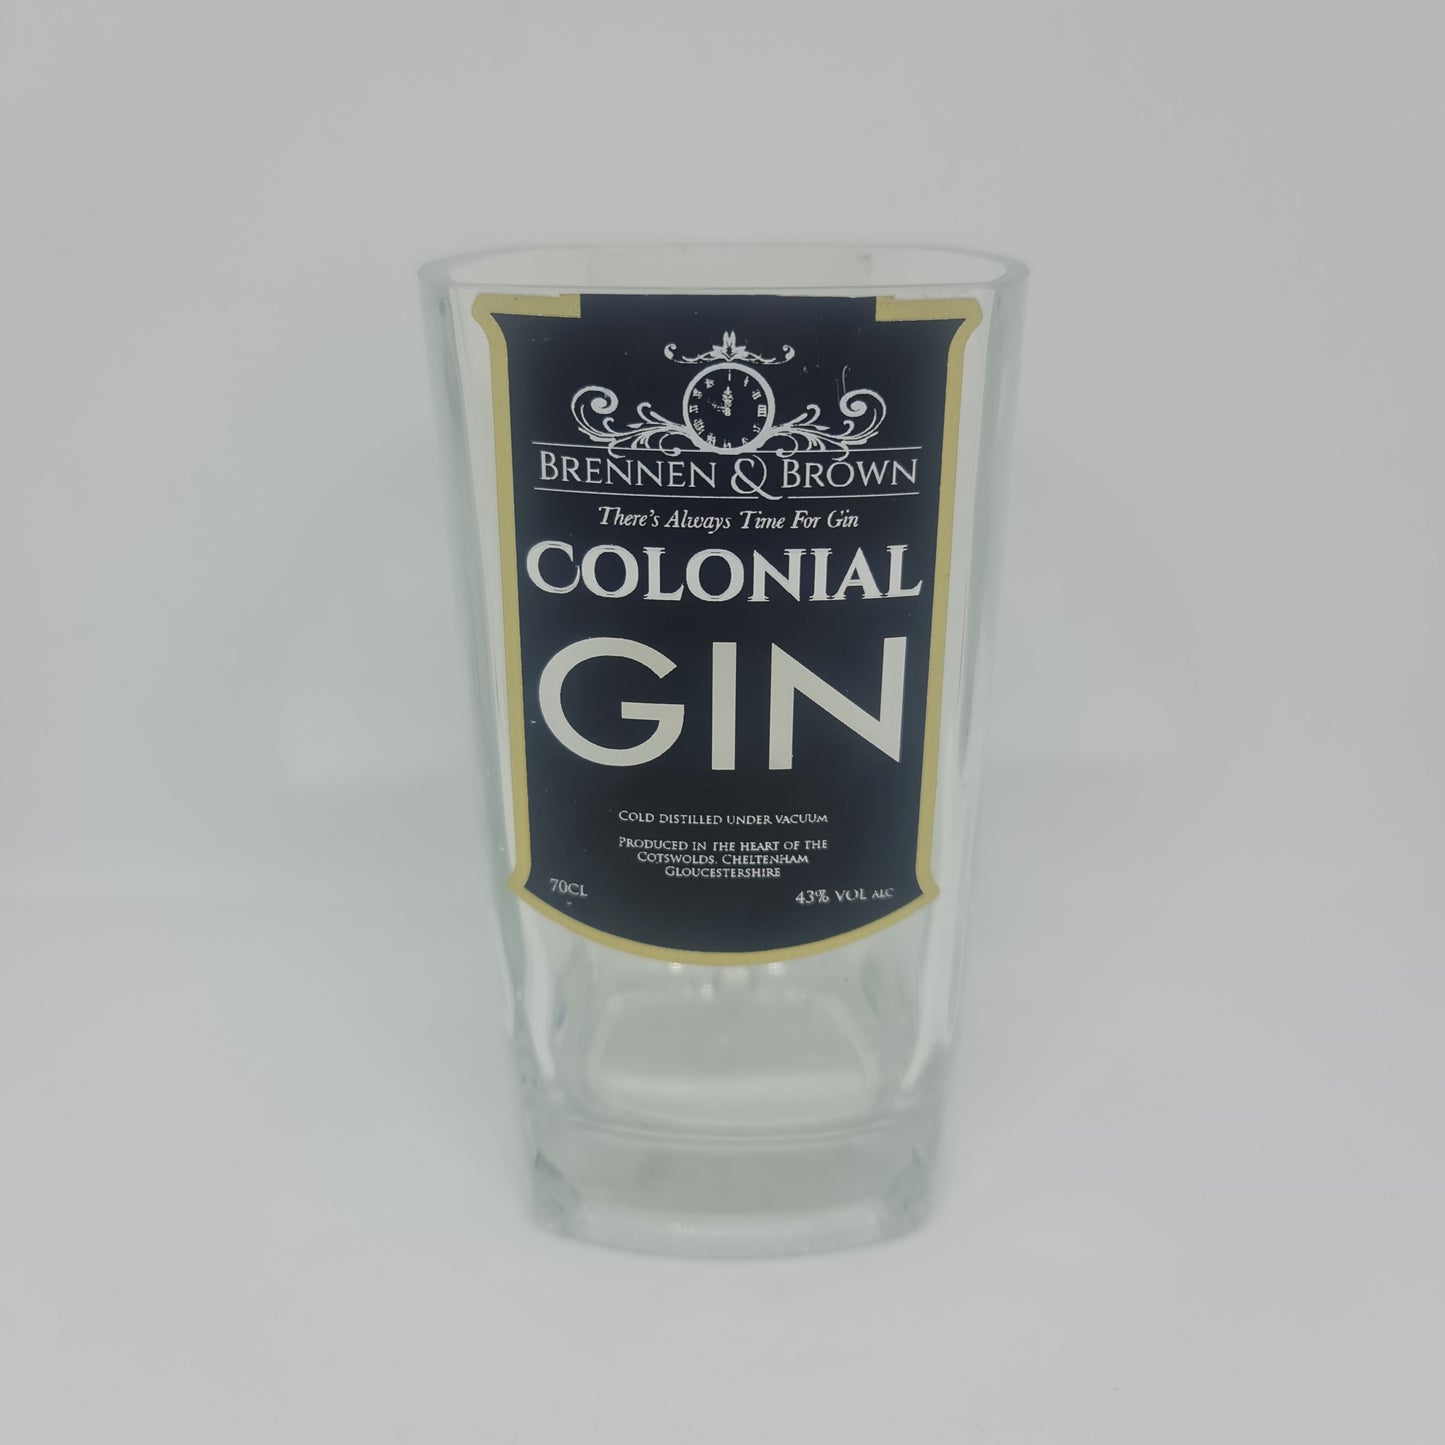 Brennan & Brown Colonial Gin Bottle Candle